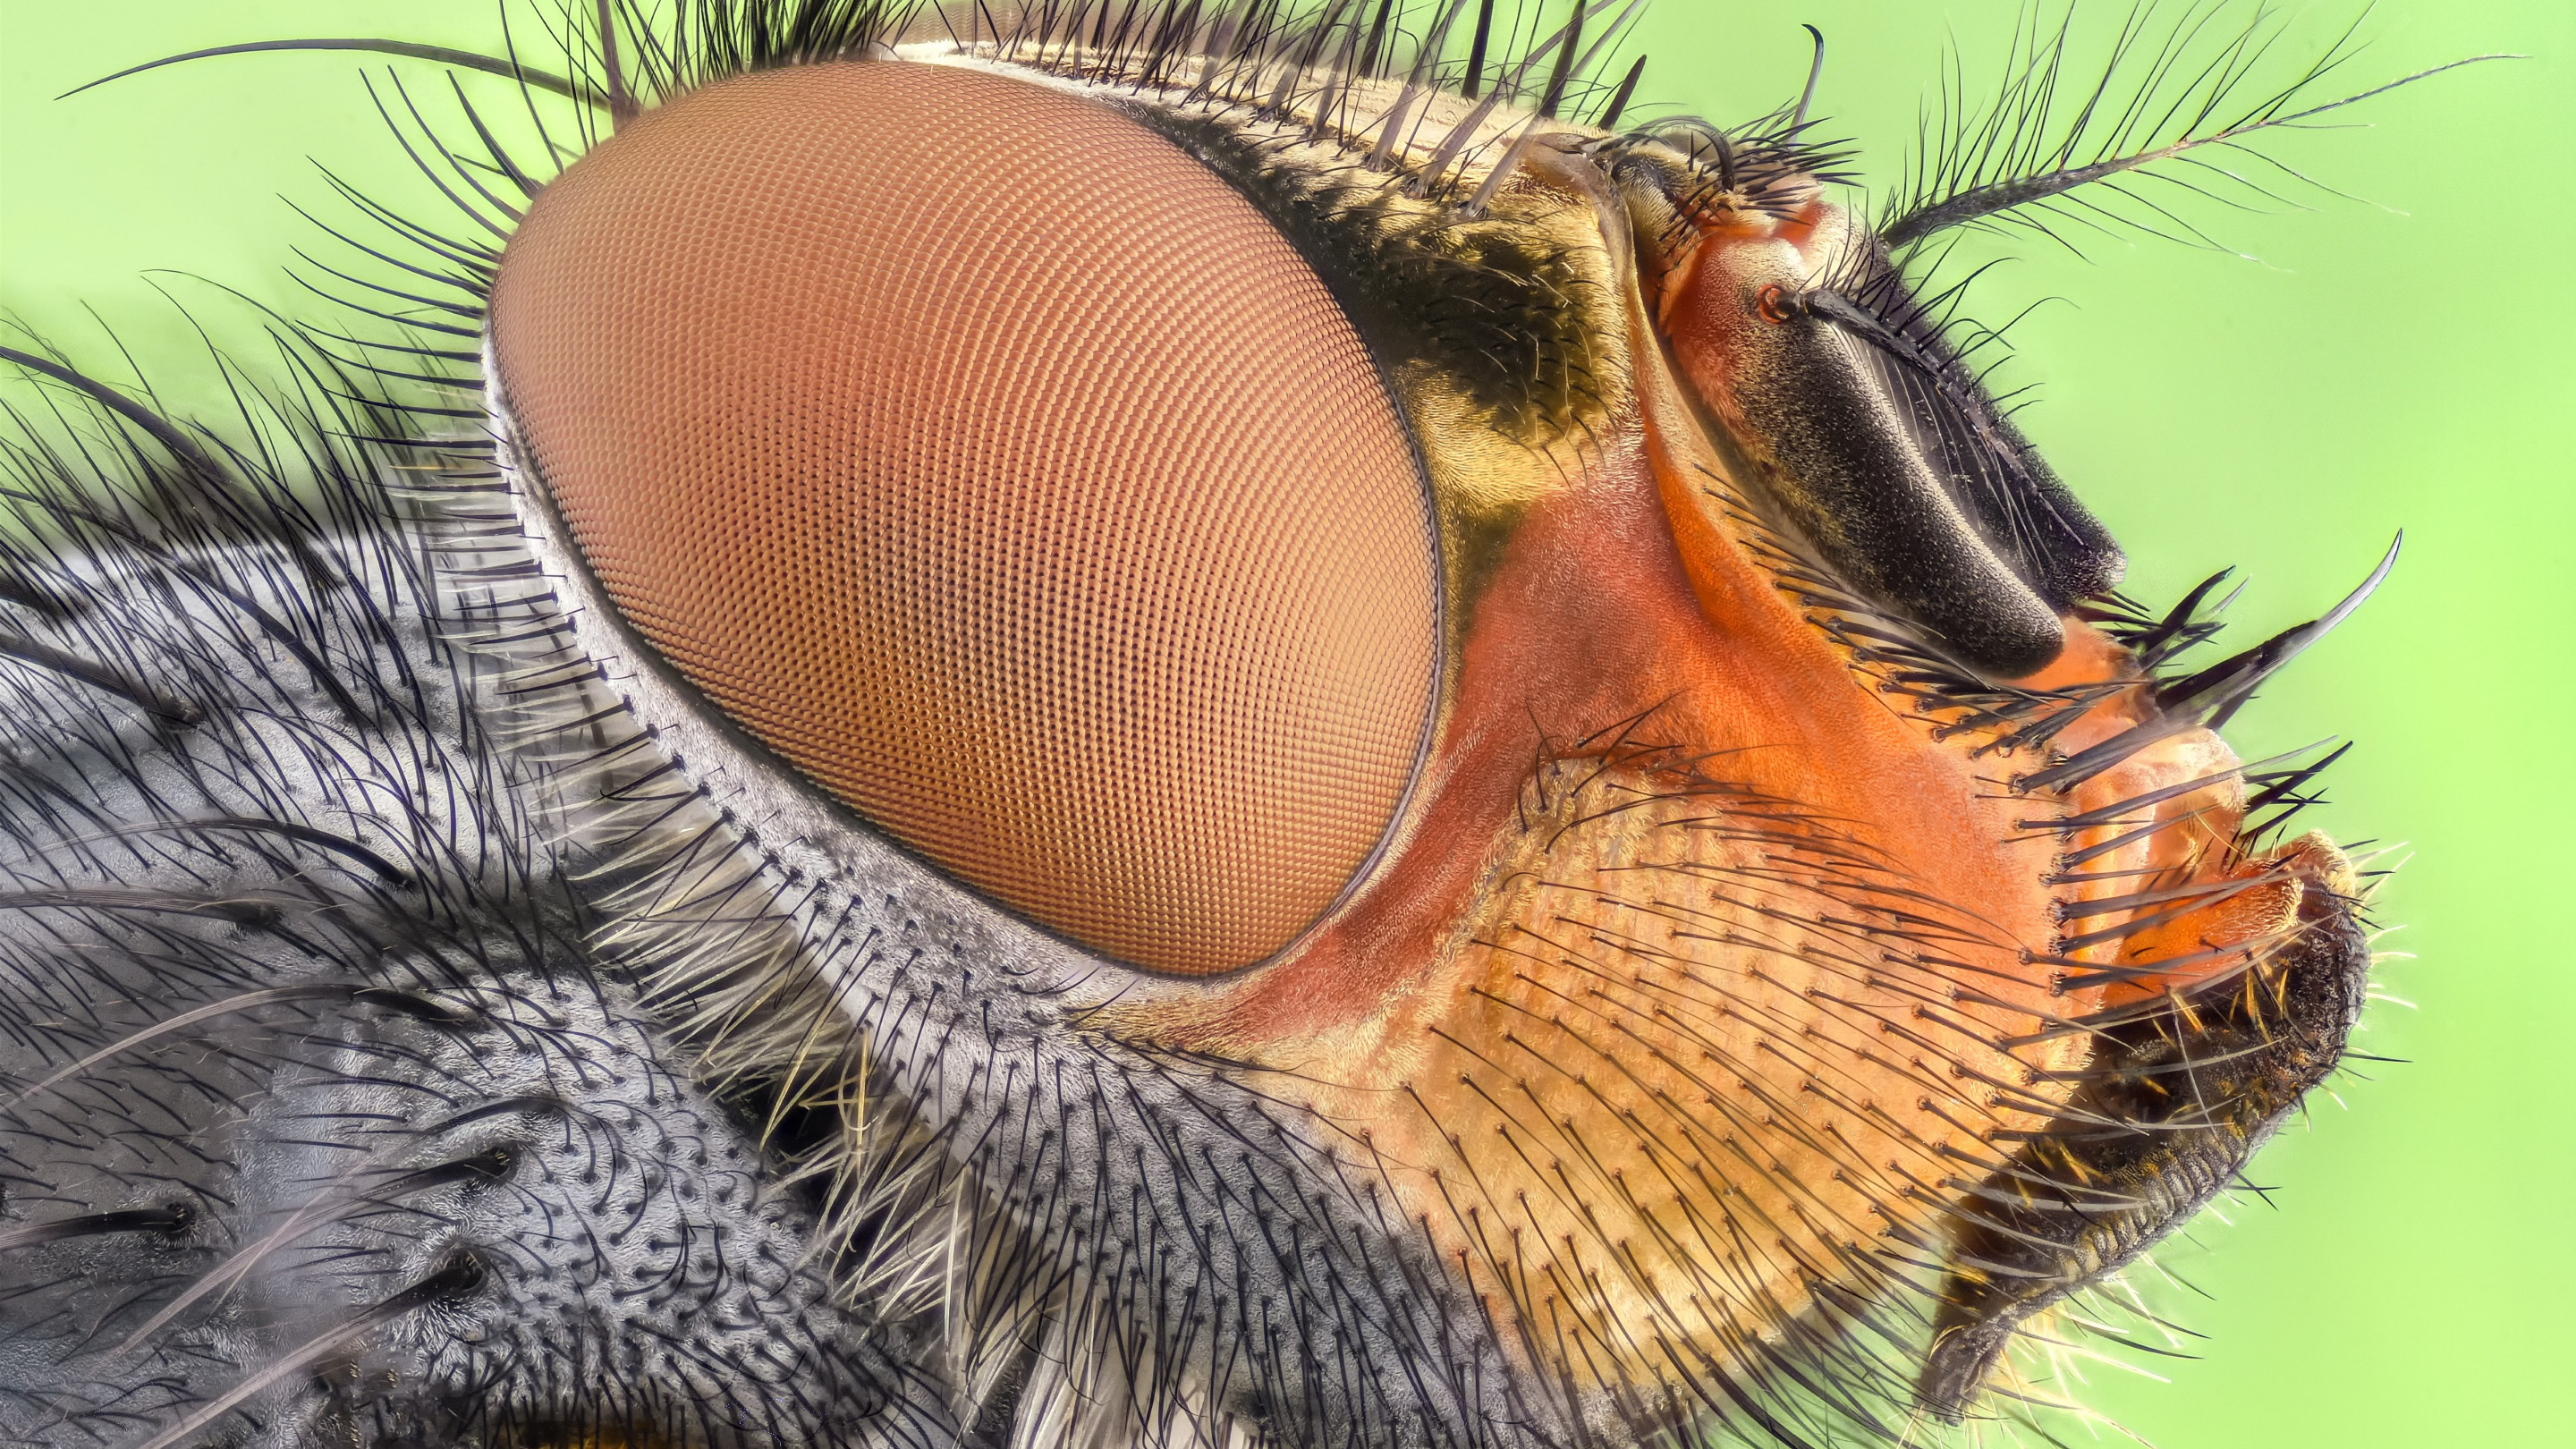 Close up insect portrait wallpaper 2880x1620